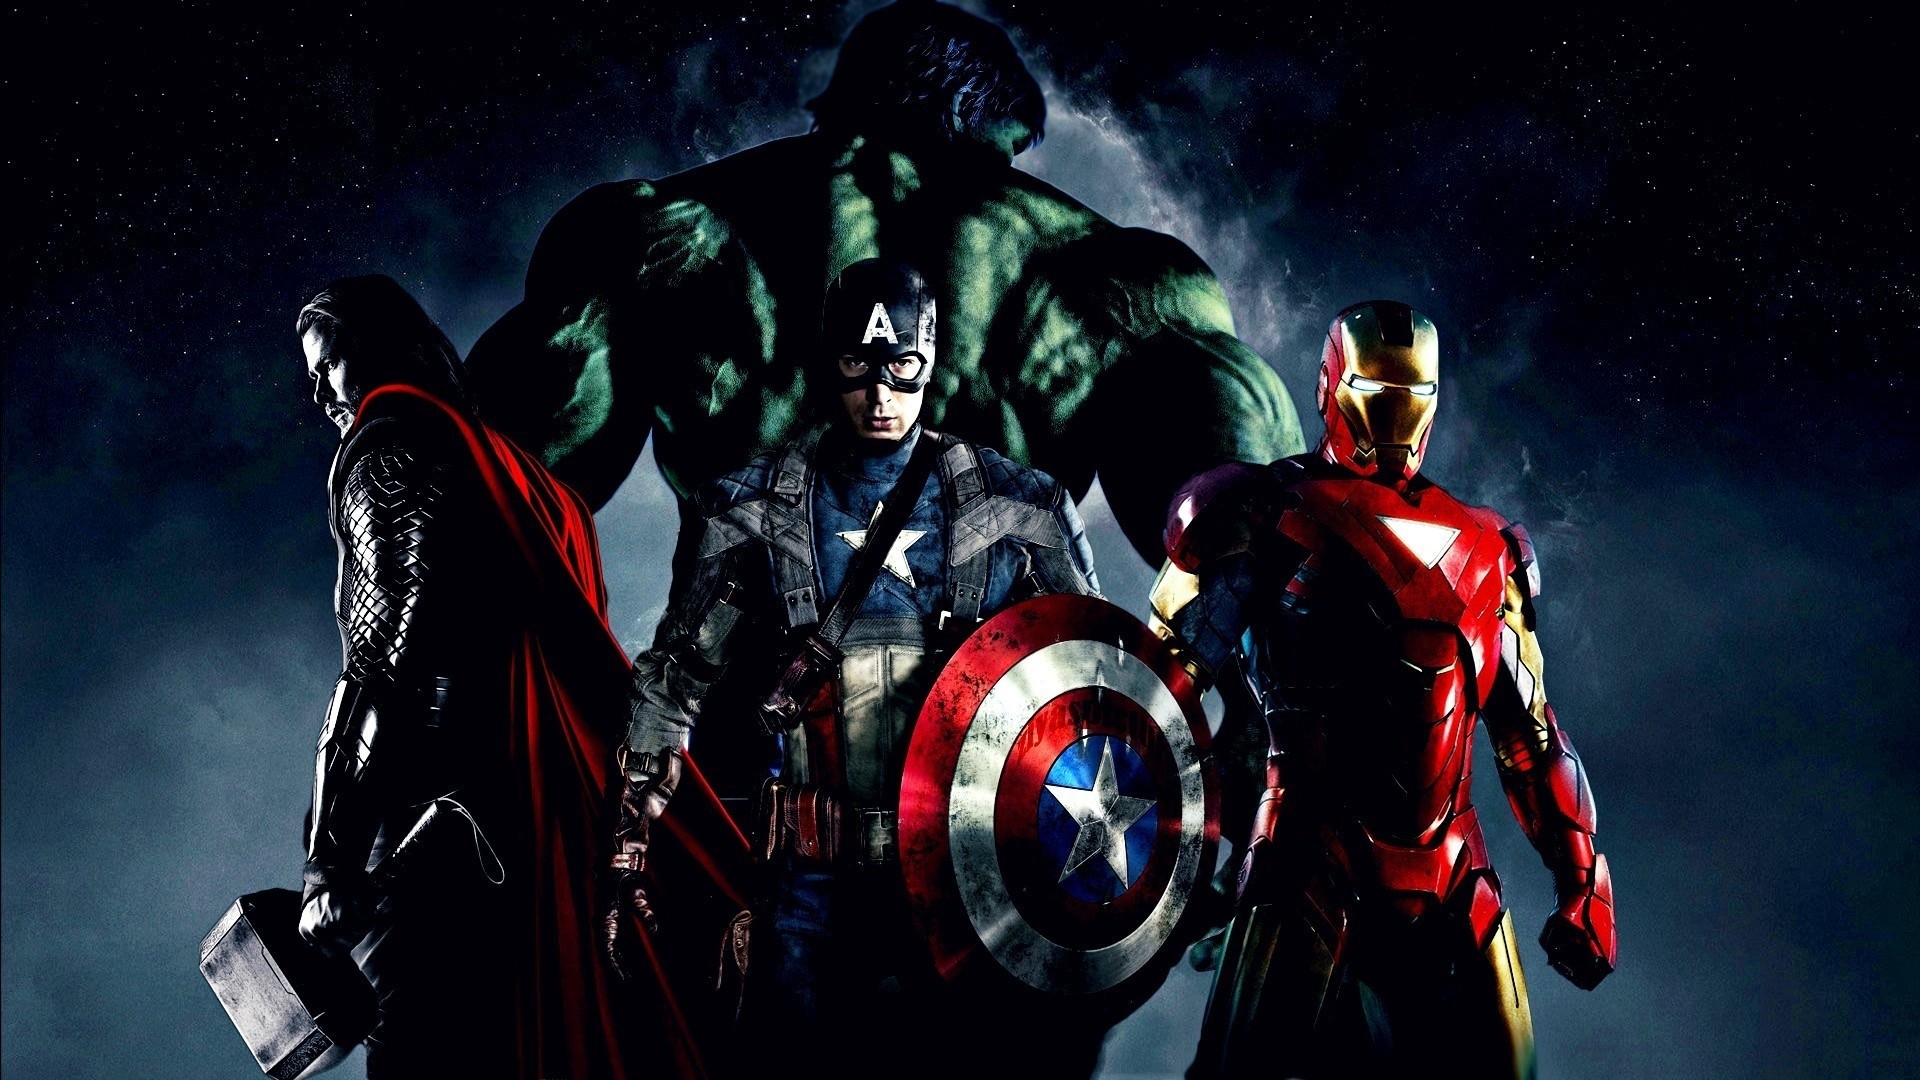 hd movie wallpapers 1080p,superhero,fictional character,movie,action film